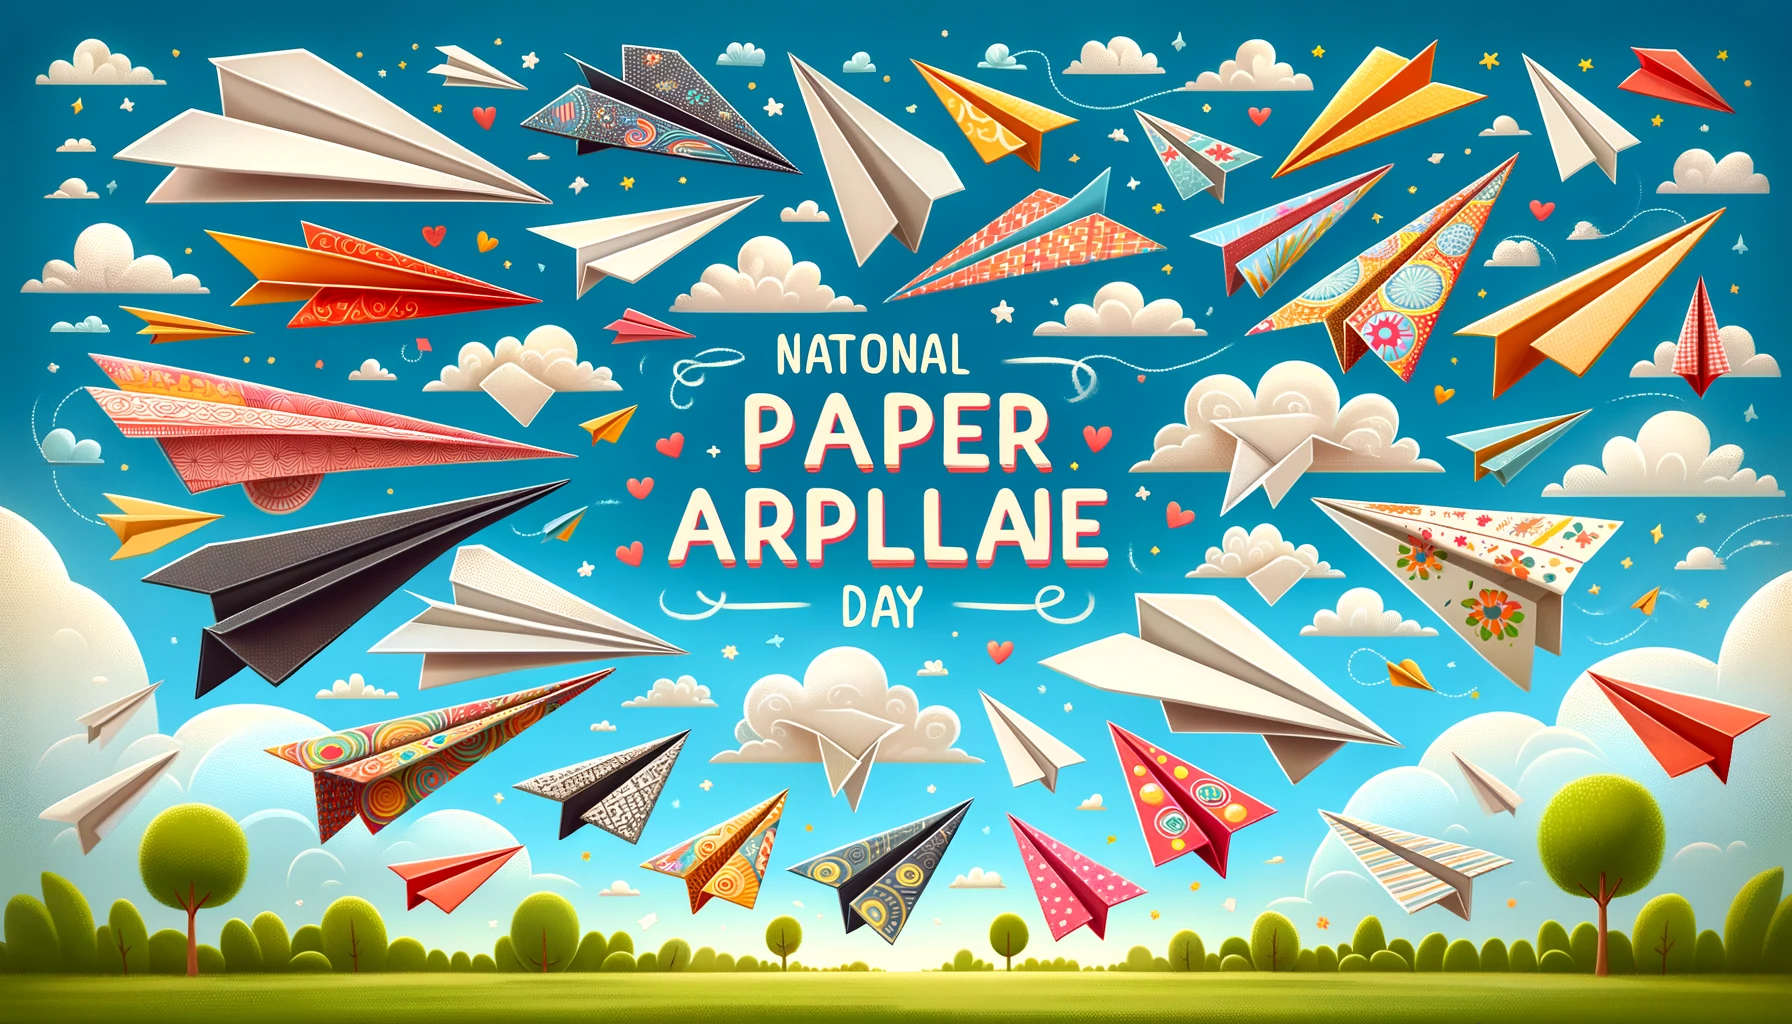 Celebrating National Paper Airplane Day